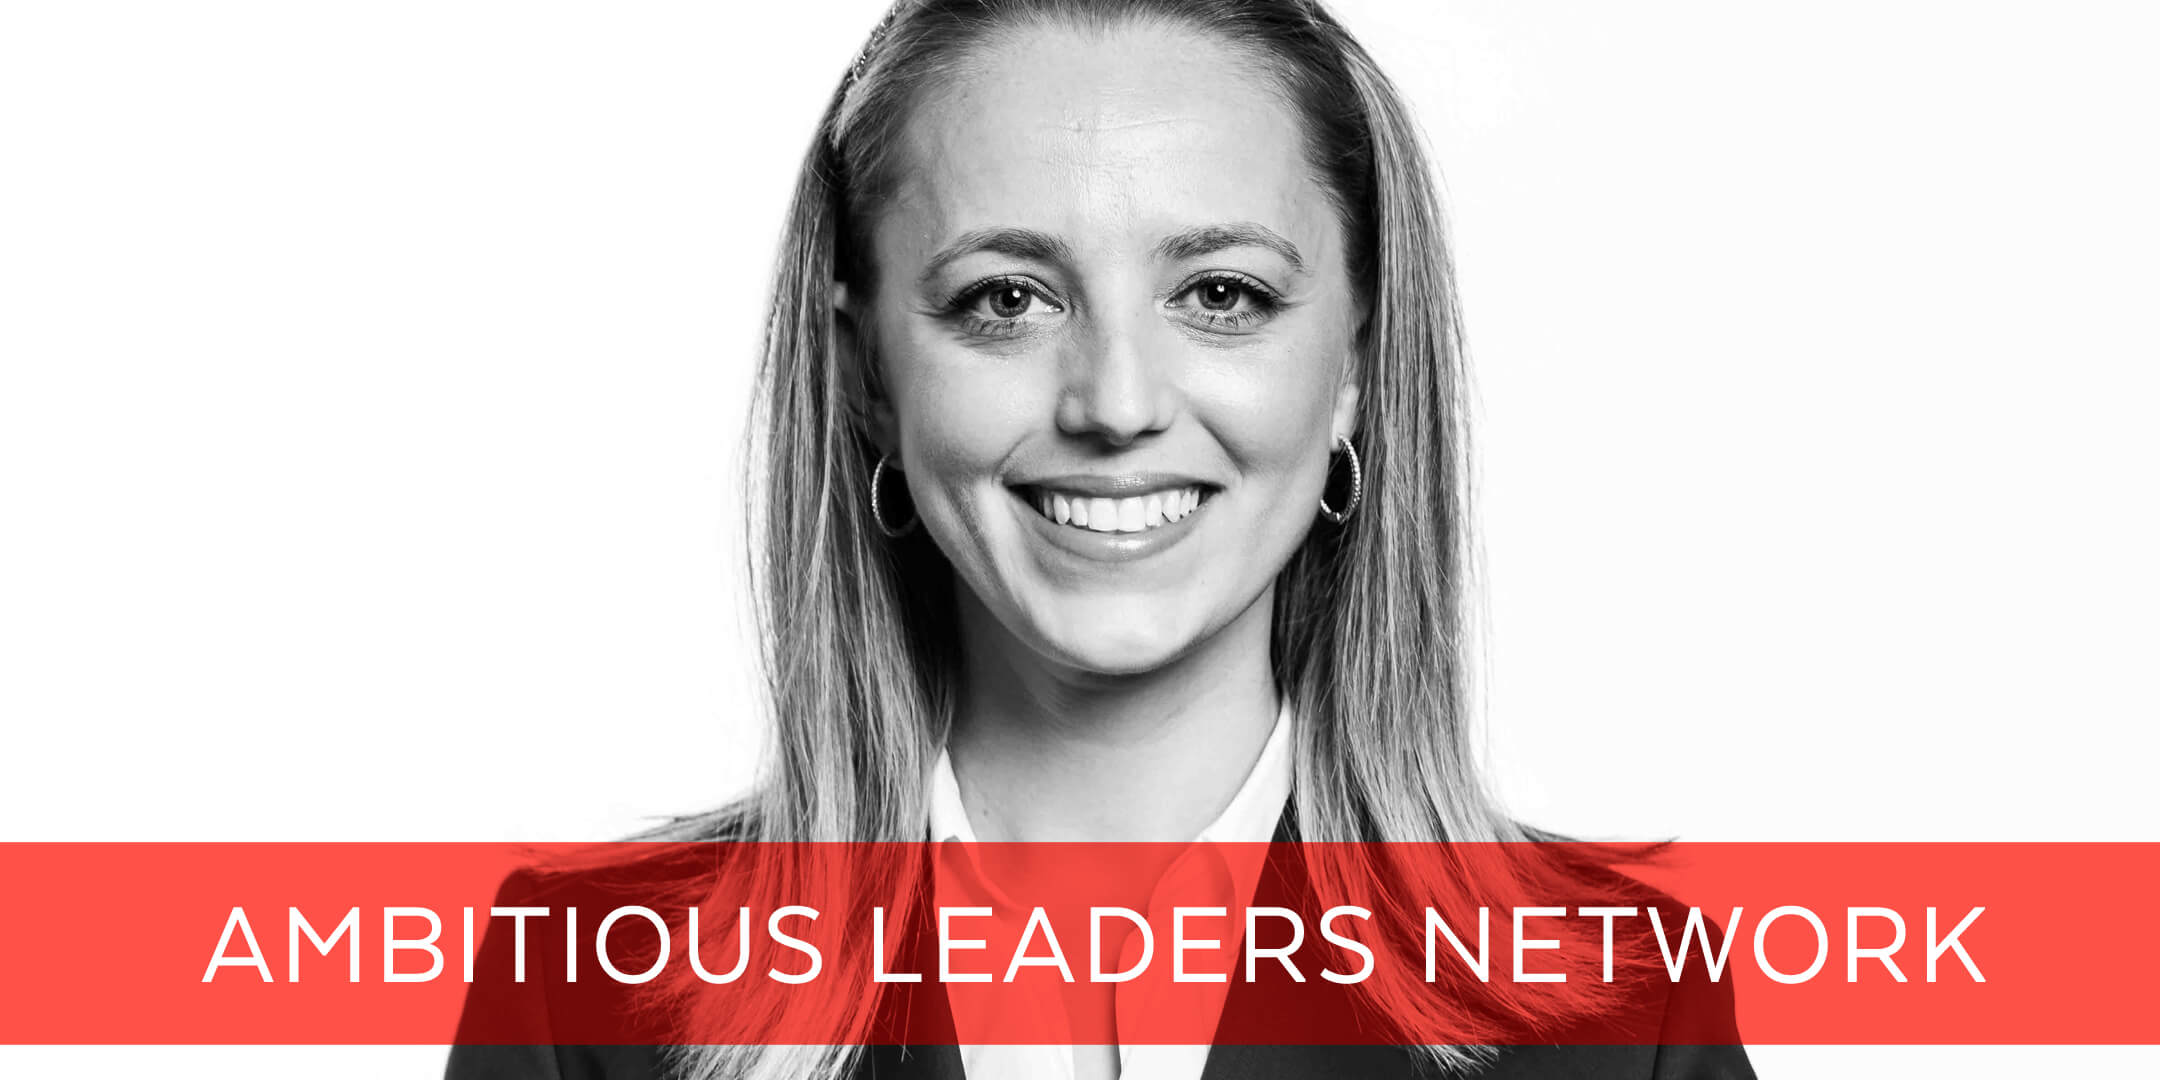 Helina Lilley - Speaker At The Ambitious Leaders Network